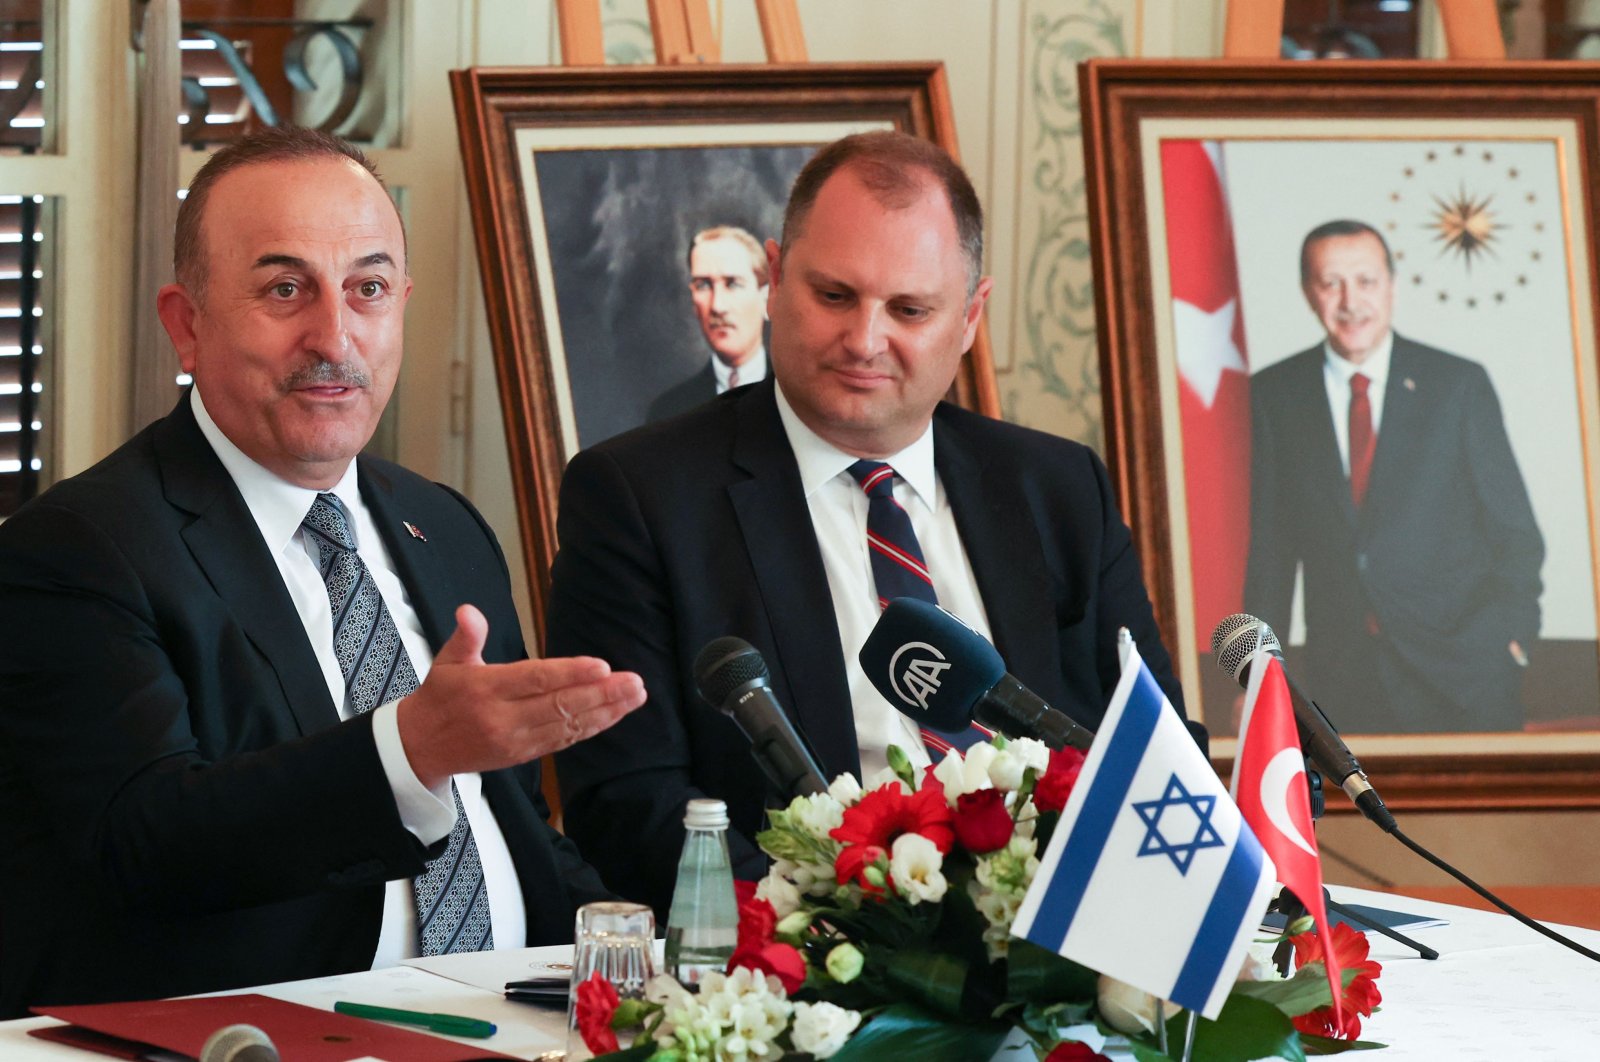 Foreign Minister Mevlüt Çavuşoğlu (L) delivers an opening statement before meeting with Israeli and Turkish business people, in Tel Aviv, Israel, May 25, 2022. (AFP Photo)